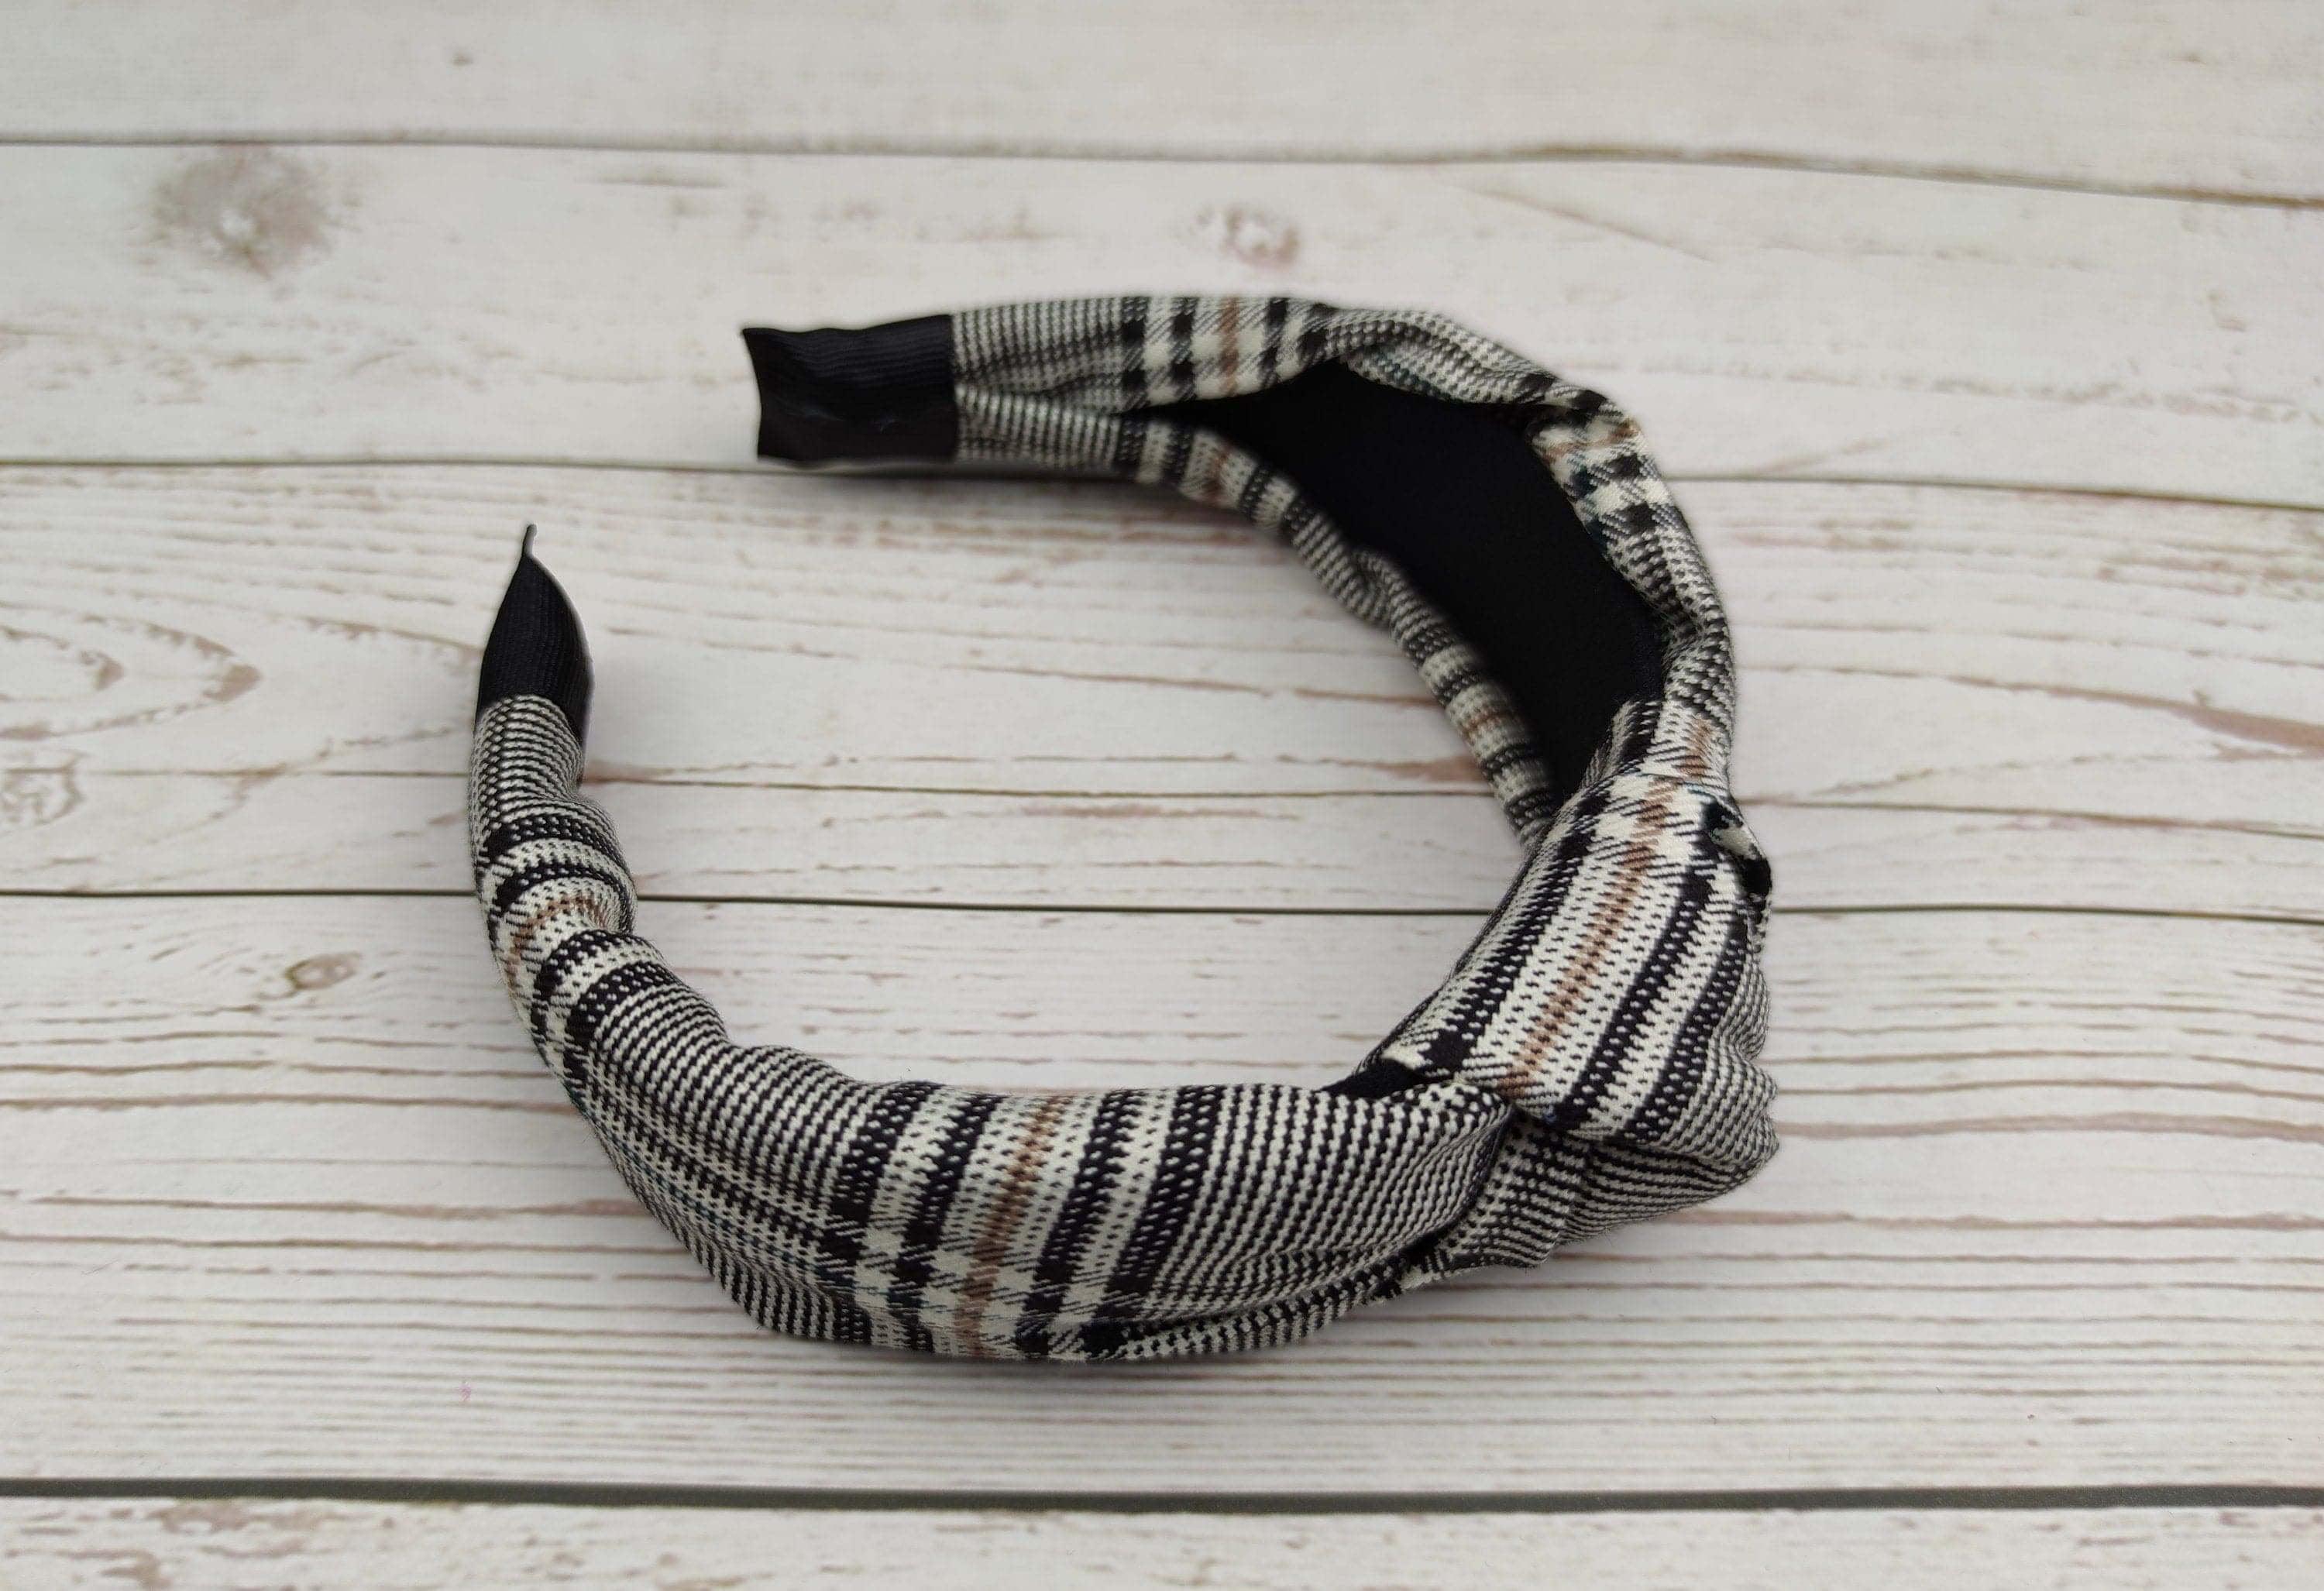 Stylish Chic and Versatile Crepe Headband - Perfect for College Girls! White and Black Striped Knotted Headband, Ideal for any Outfit available at Moyoni Design